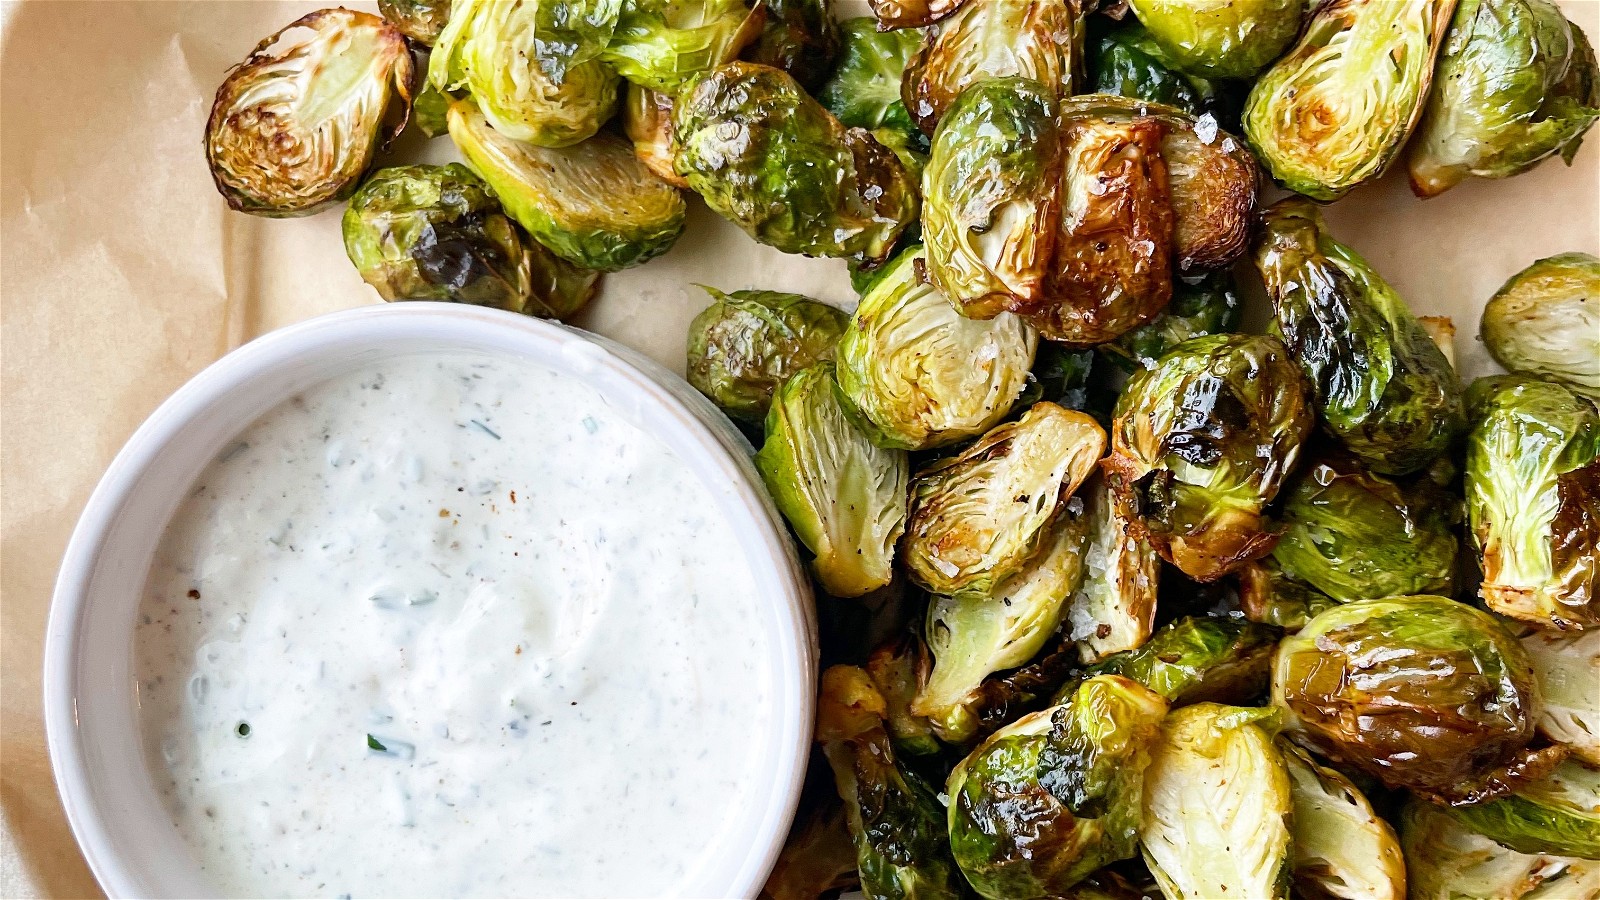 Image of Crispy Brussels Sprouts with Green Goddess Dip